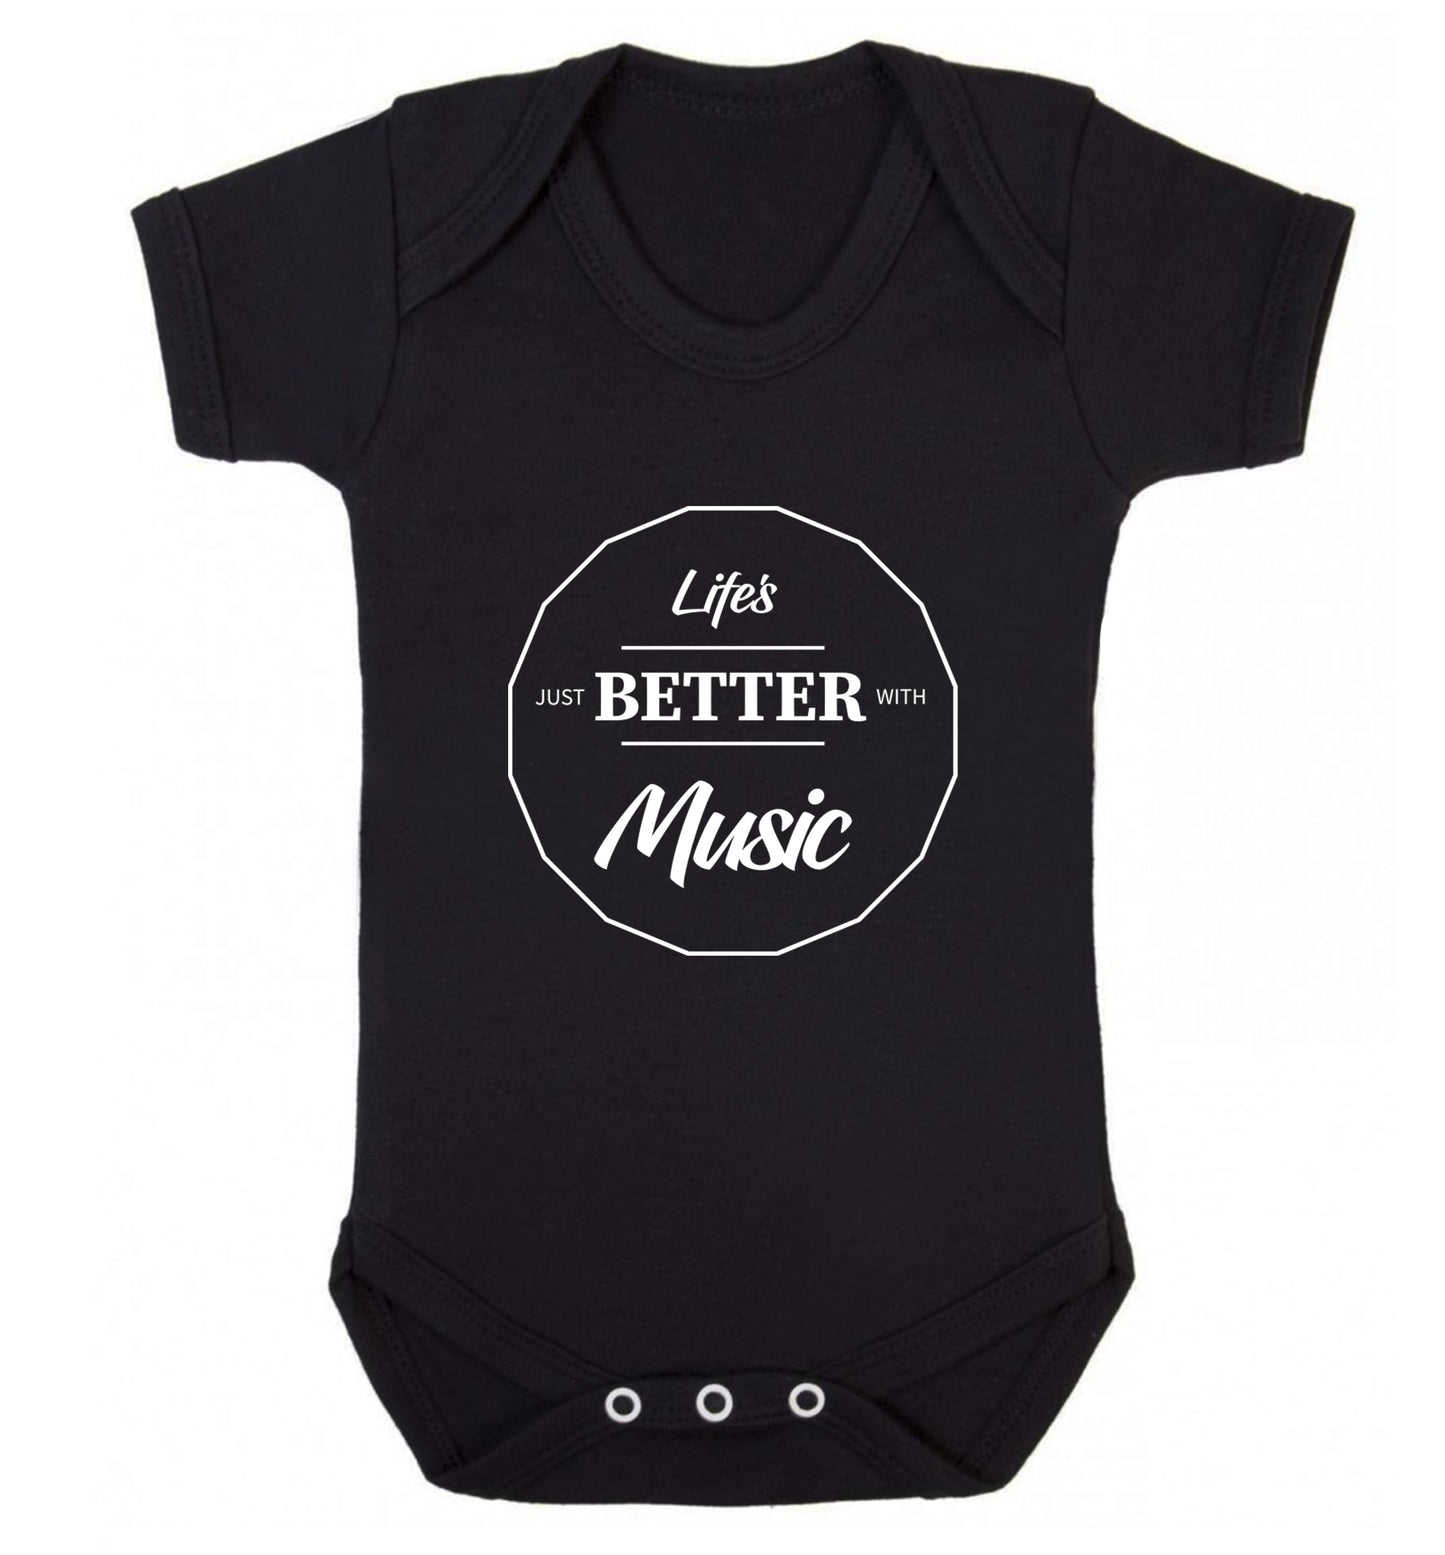 Life is Better With Music Baby Vest black 18-24 months